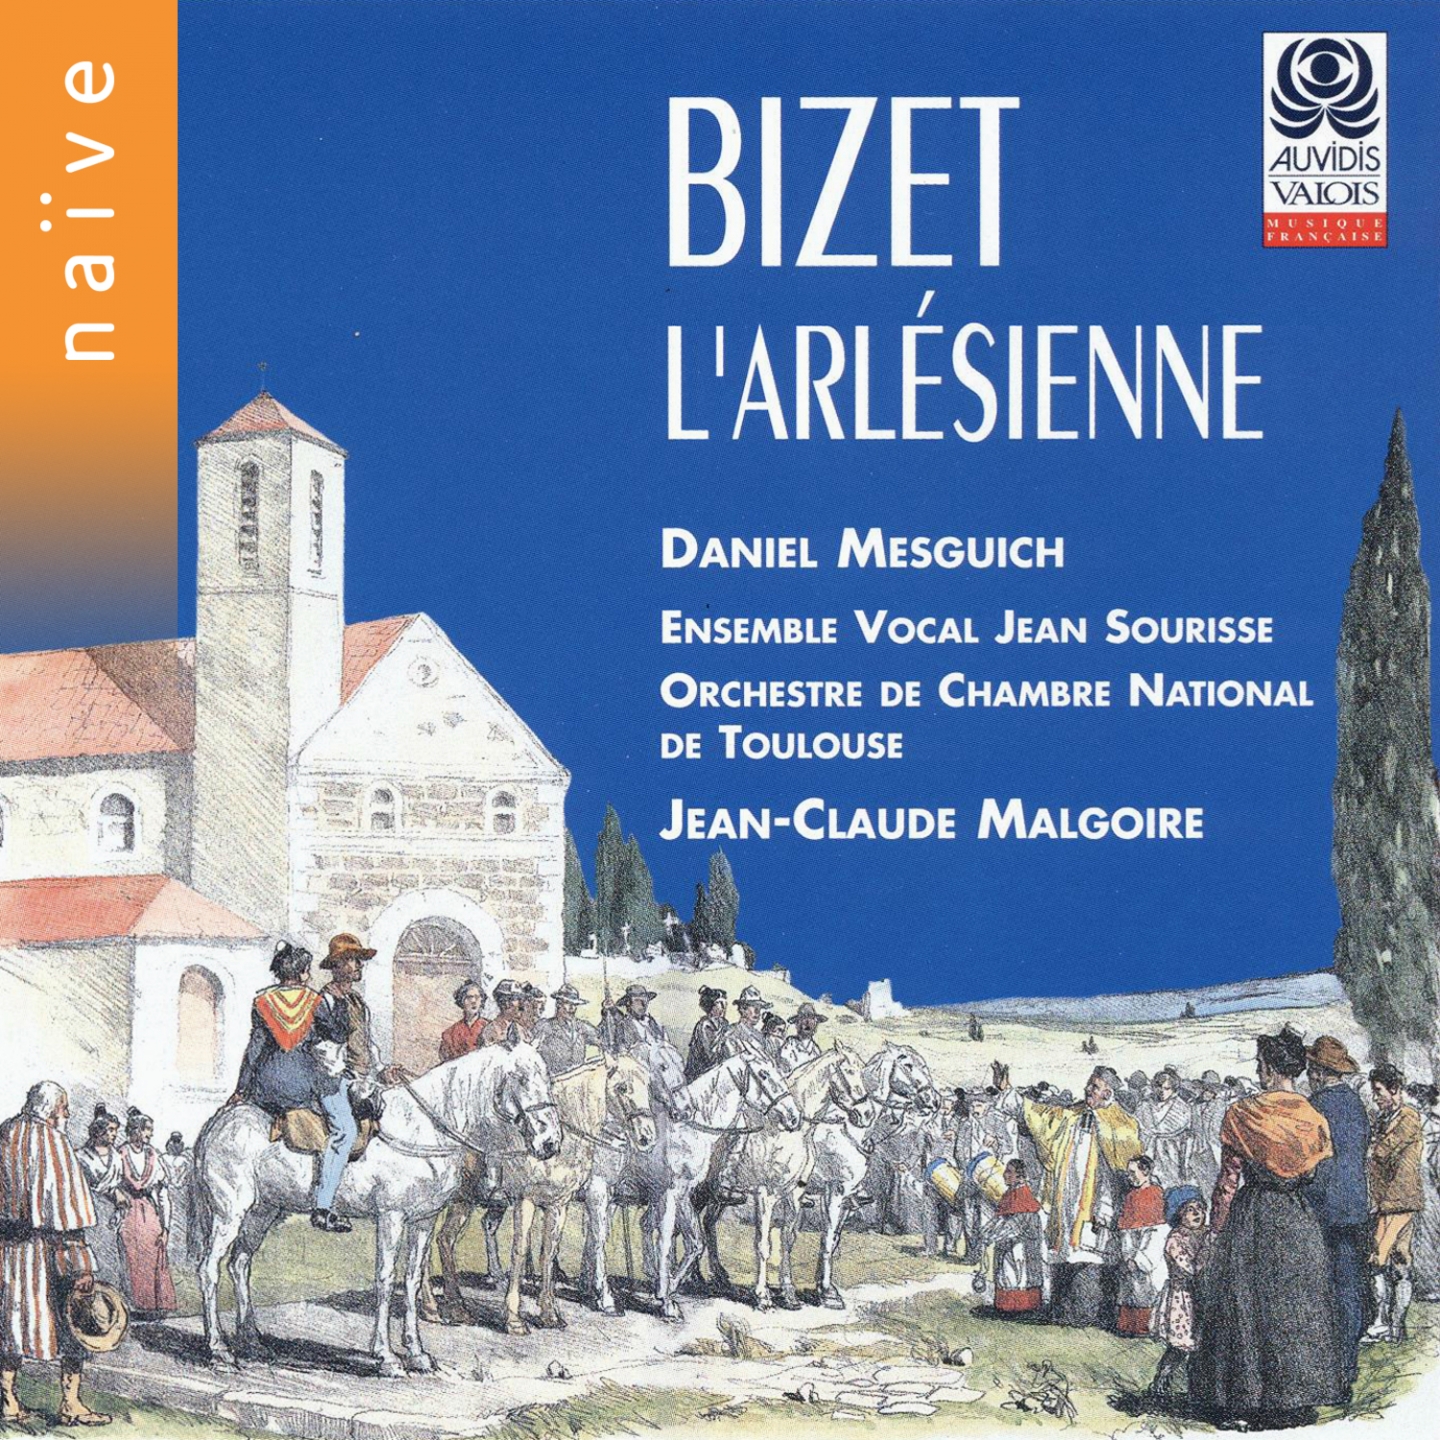 L' Arle sienne, Op. 23, GB 30, Tableau I, Act I: Ouverture